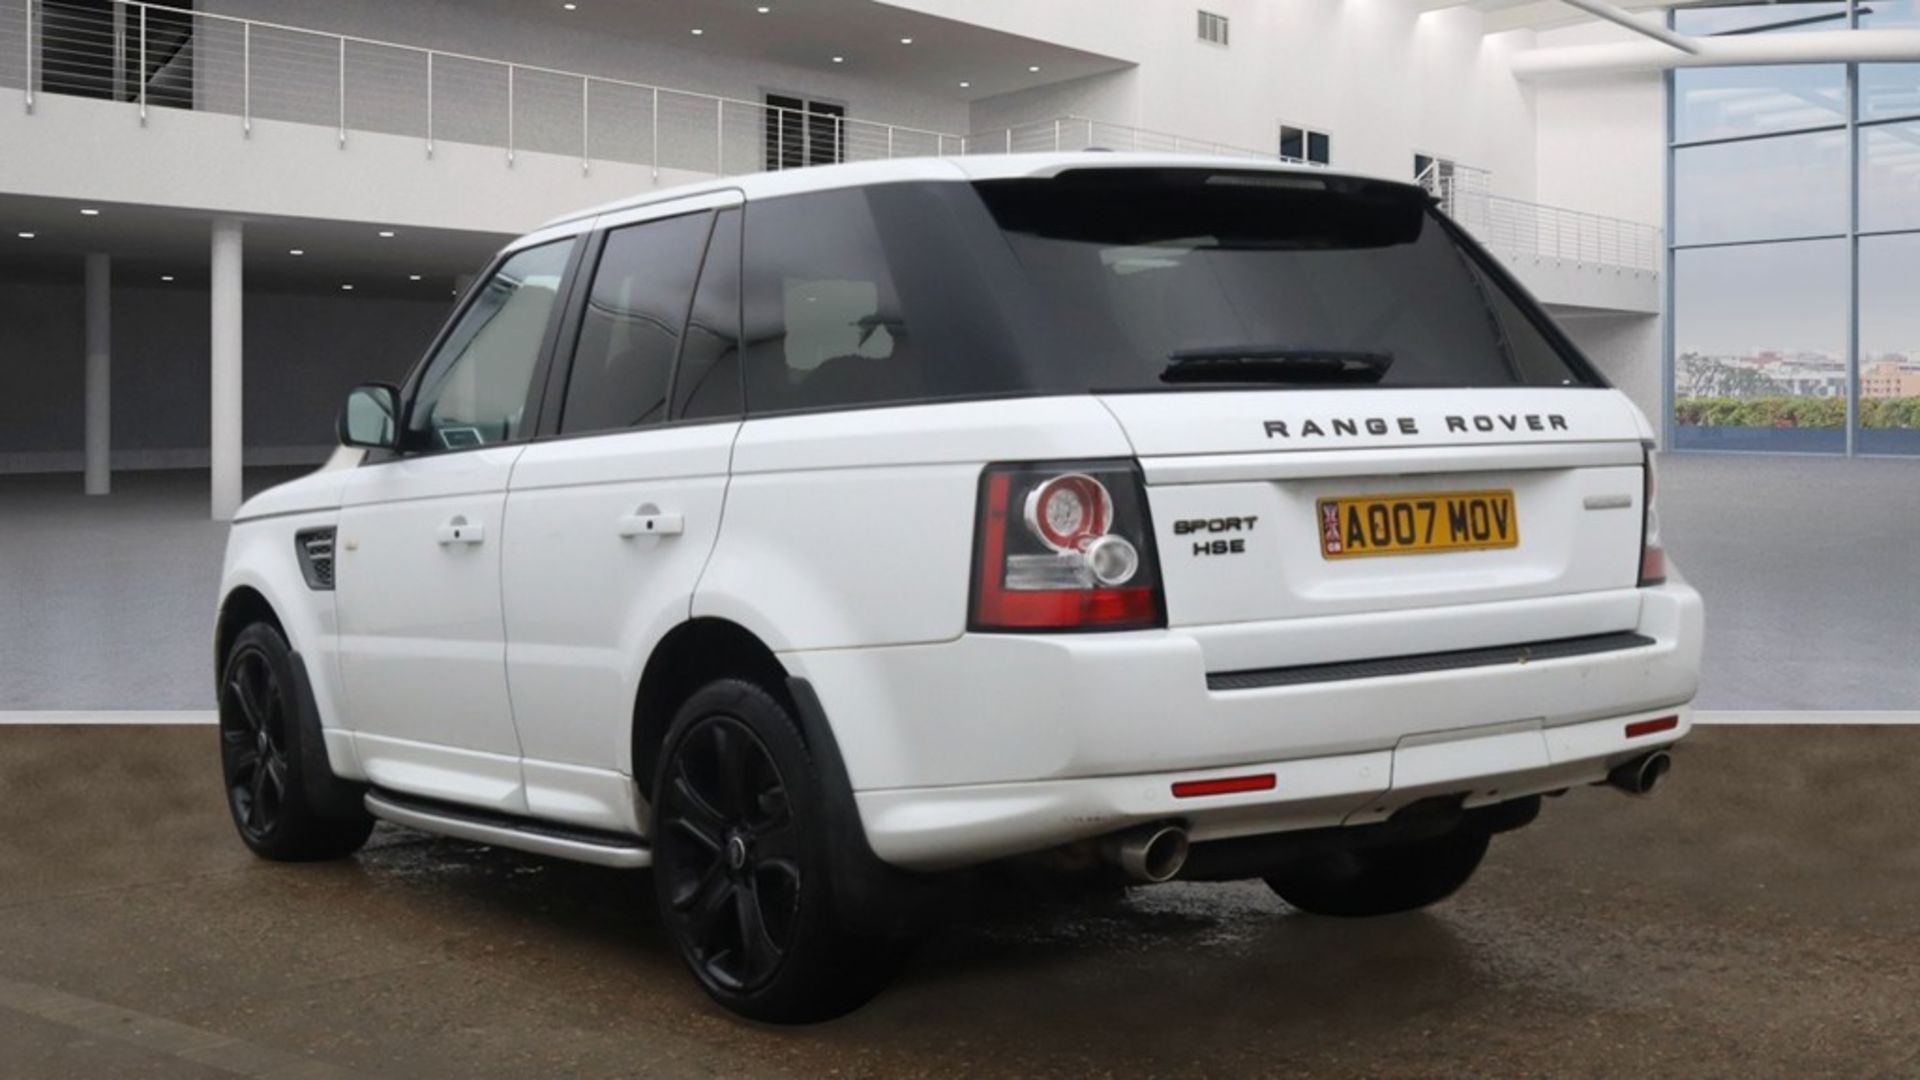 ** ON SALE ** Land Rover Range Rover Sport 3.0 SDV6 HSE BLACK EDITION StationWagon '2013 Year' - Image 3 of 9